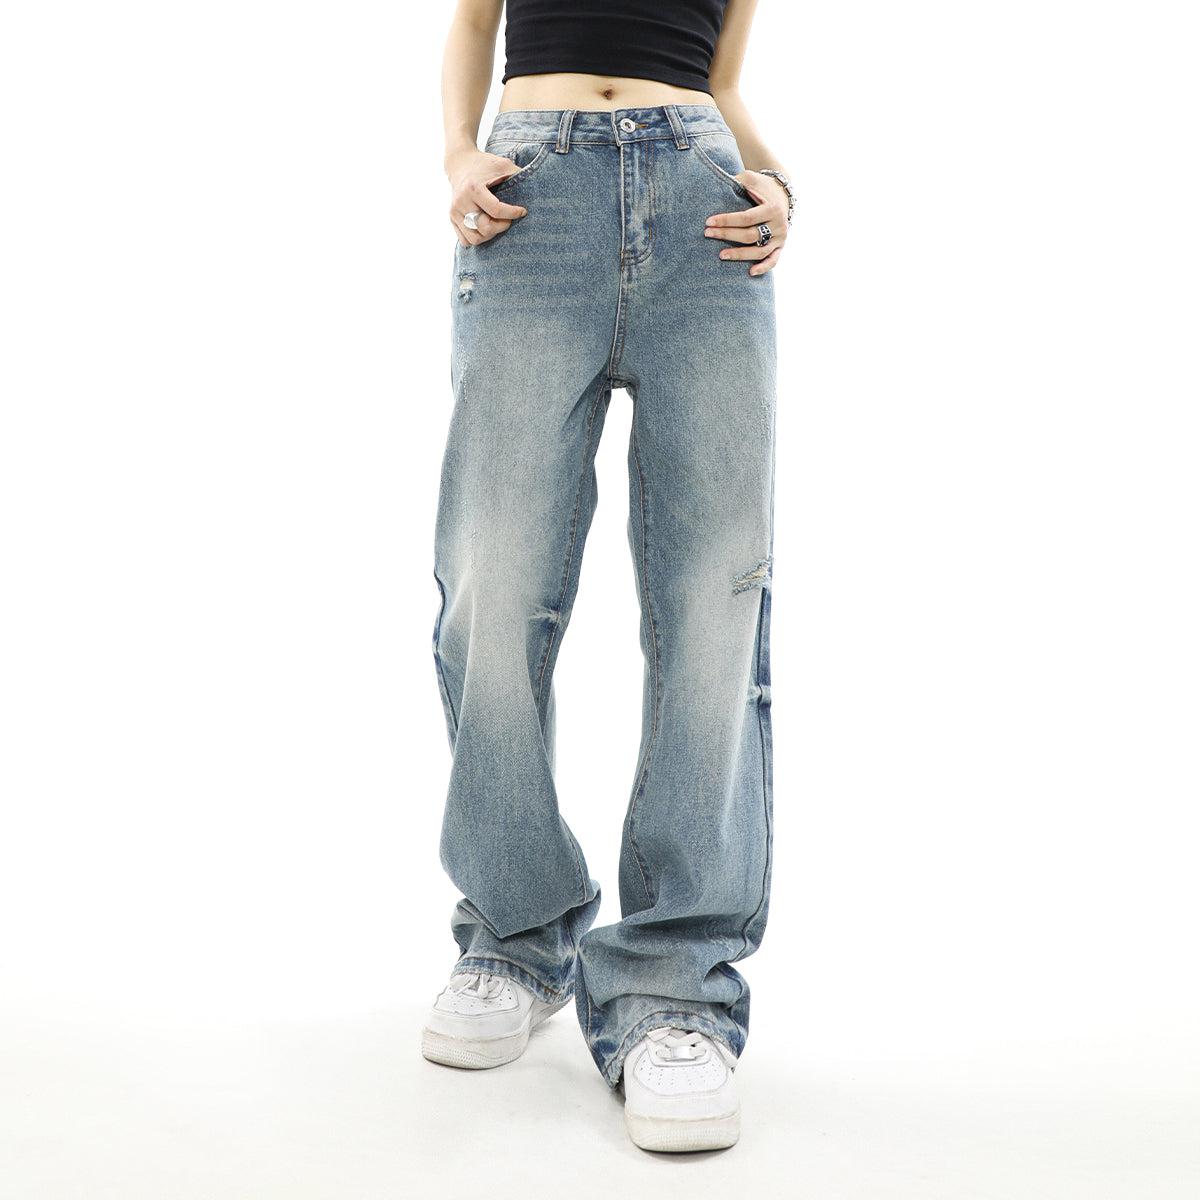 Mr Nearly Washed Distressed Style Loose Jeans Korean Street Fashion Jeans By Mr Nearly Shop Online at OH Vault